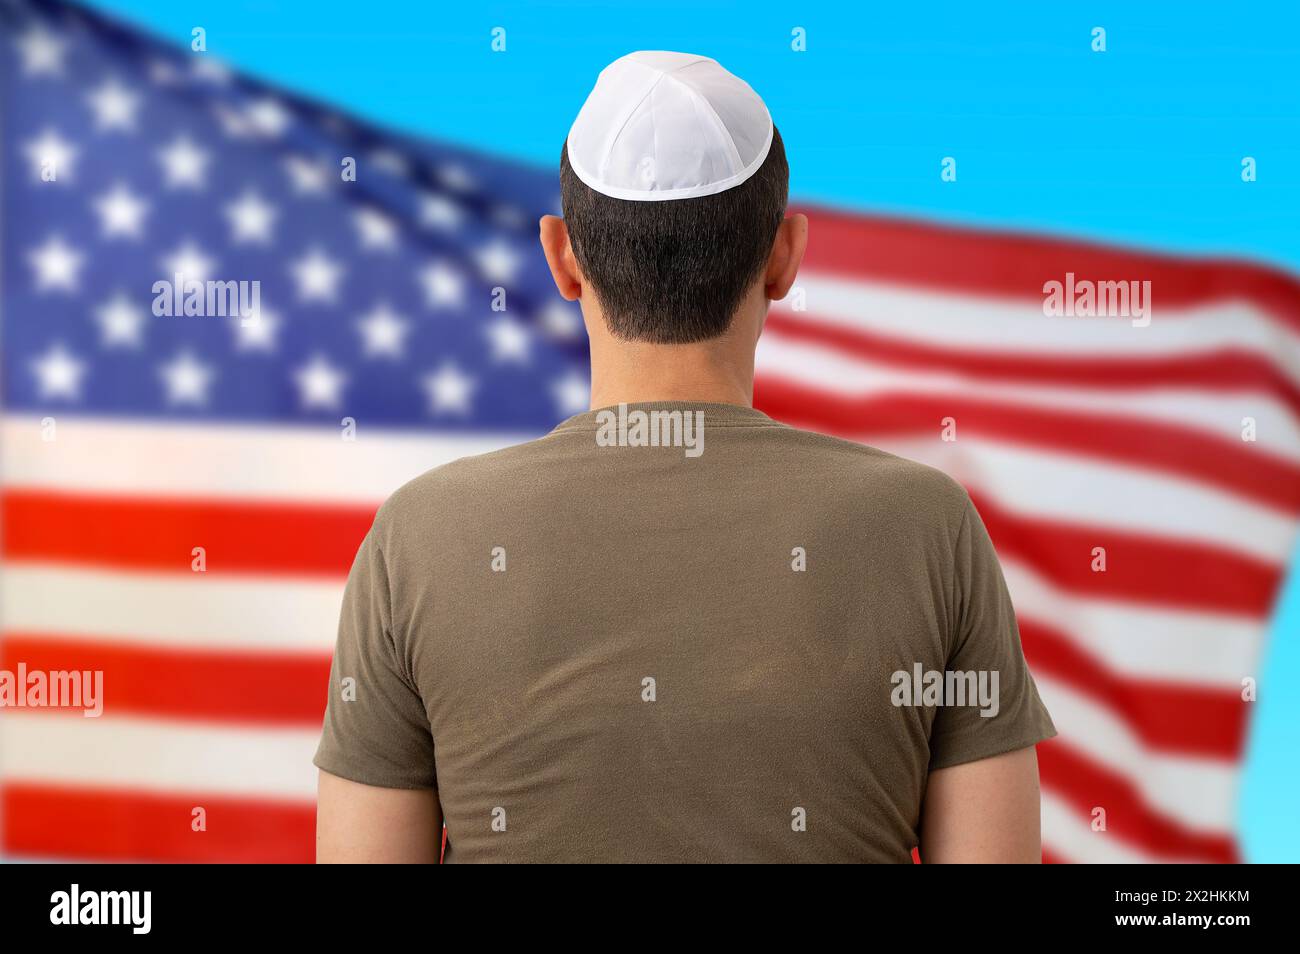 Back view of jewish citizen wearing yarmulke in front of american flag for multi-ethnicity nature of USA Stock Photo